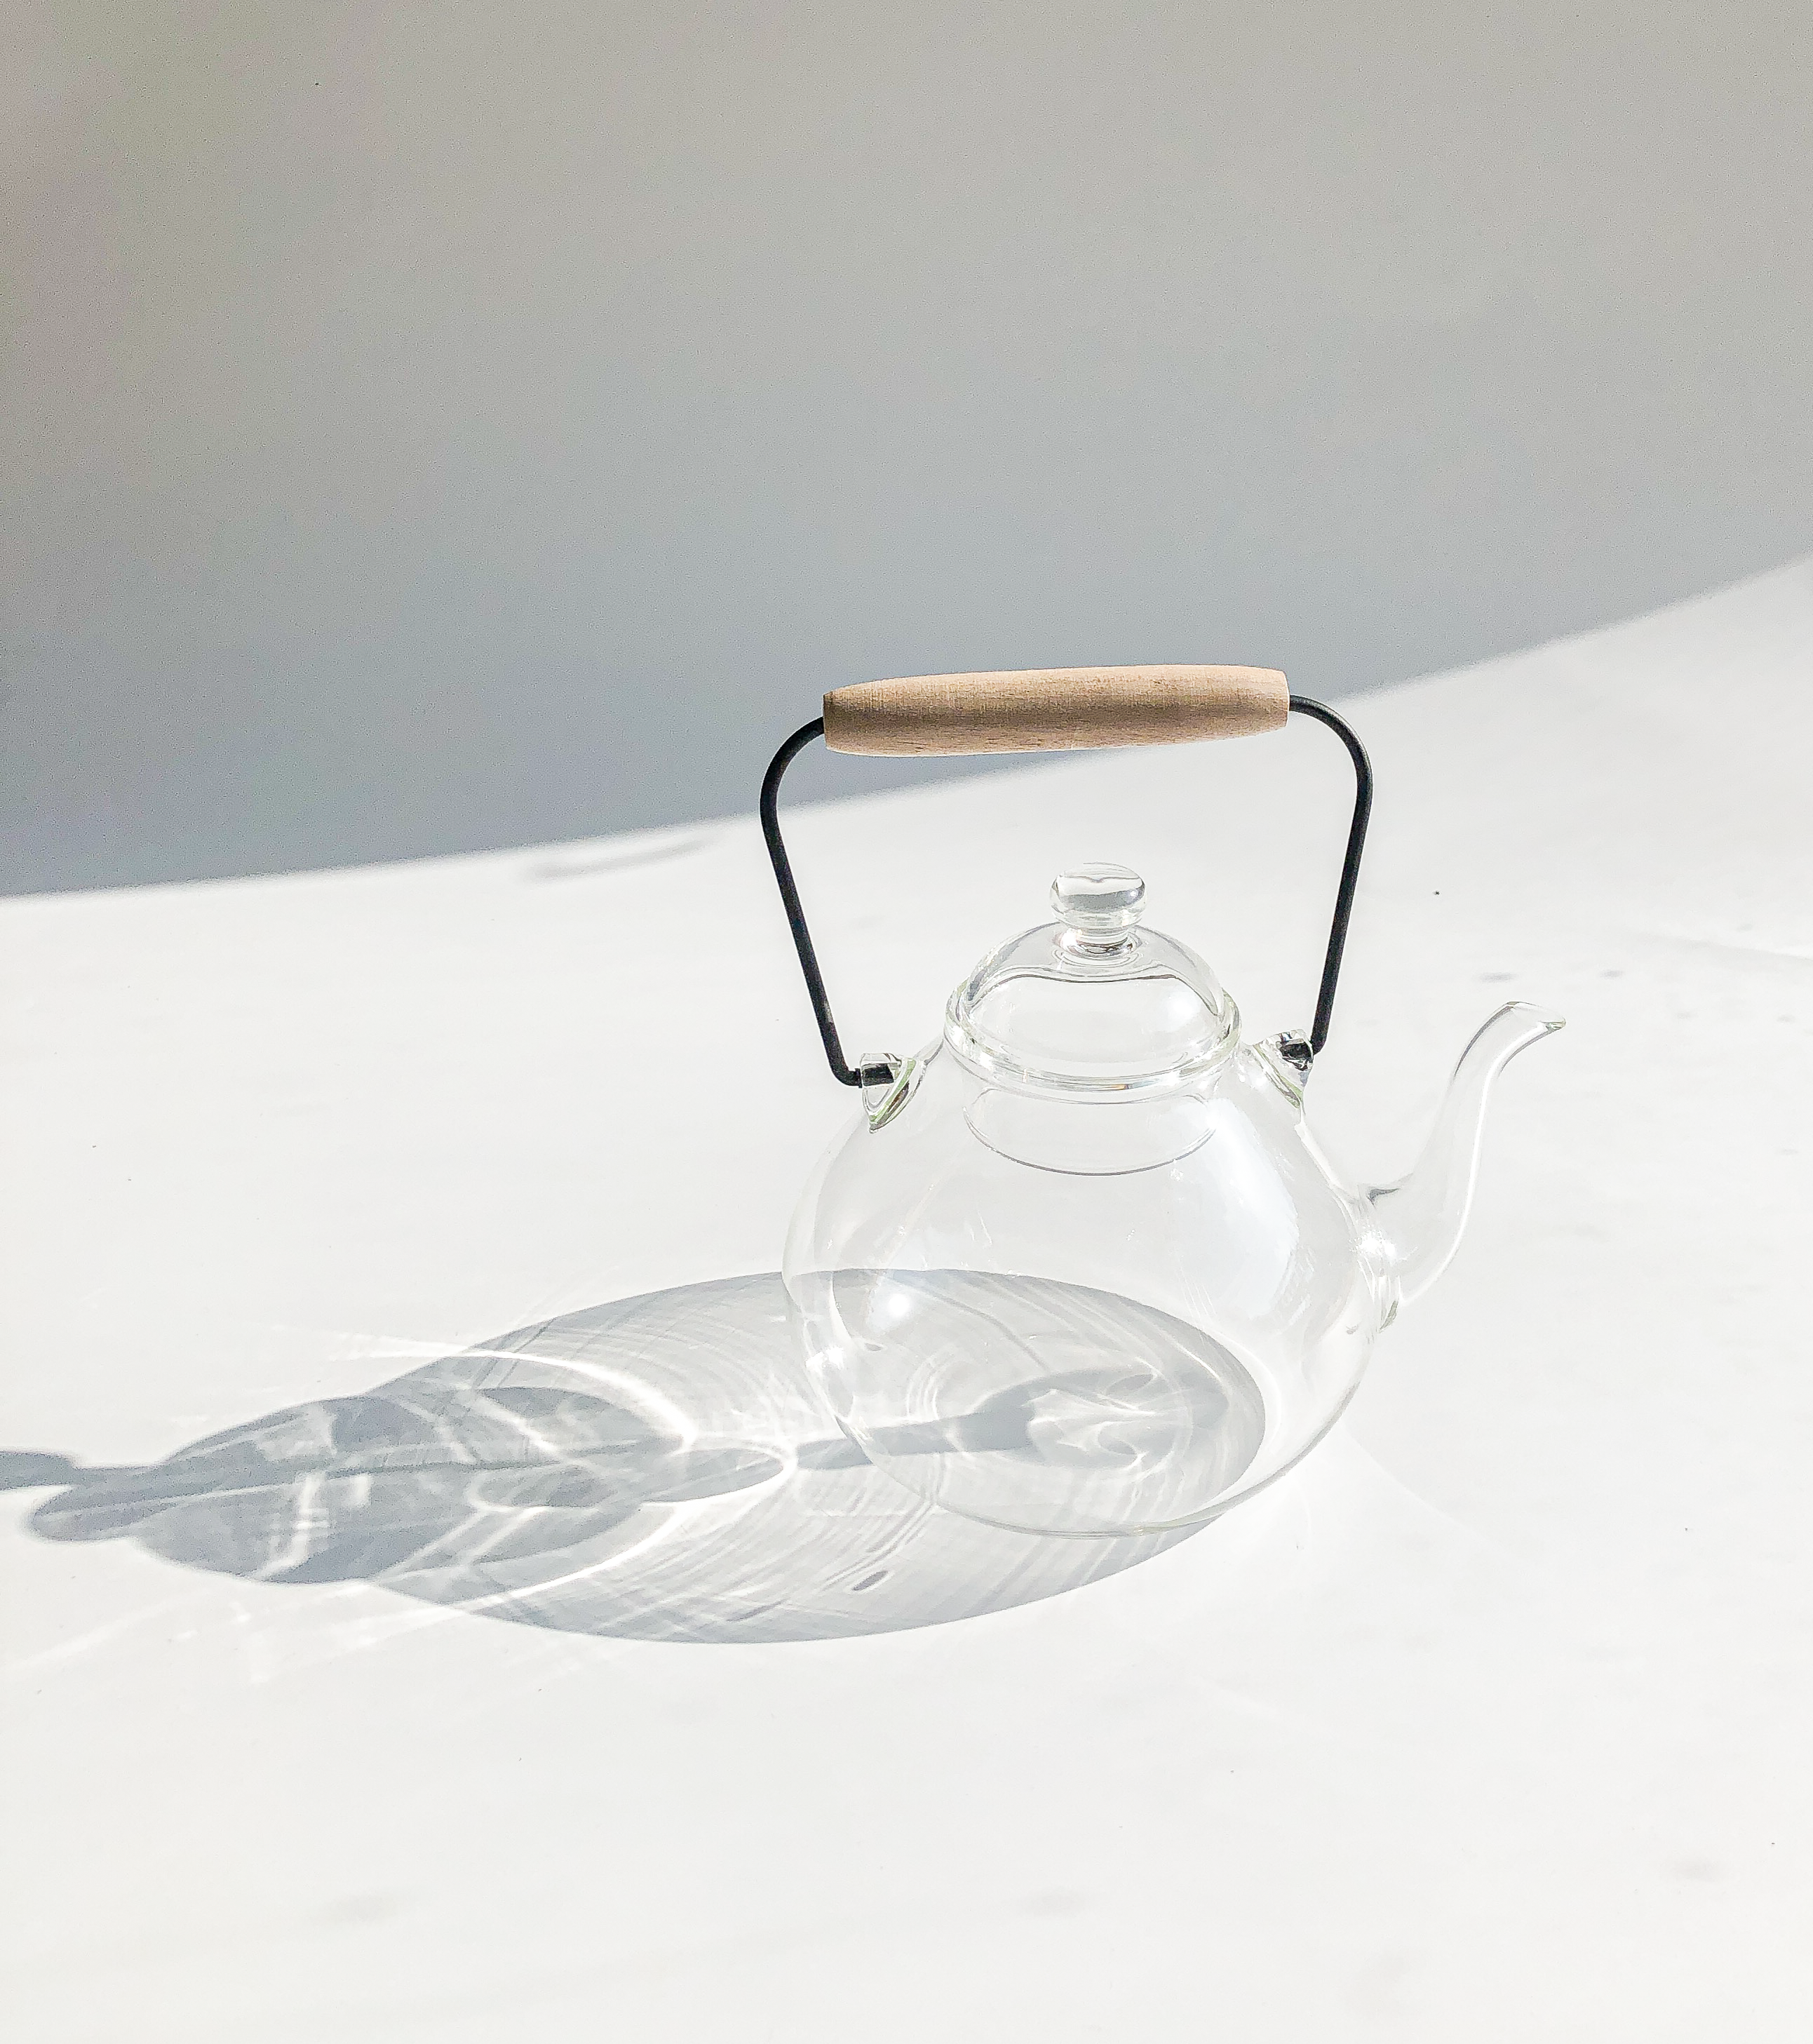 Wooden Handle Glass Kettle by PROSE Tabletop